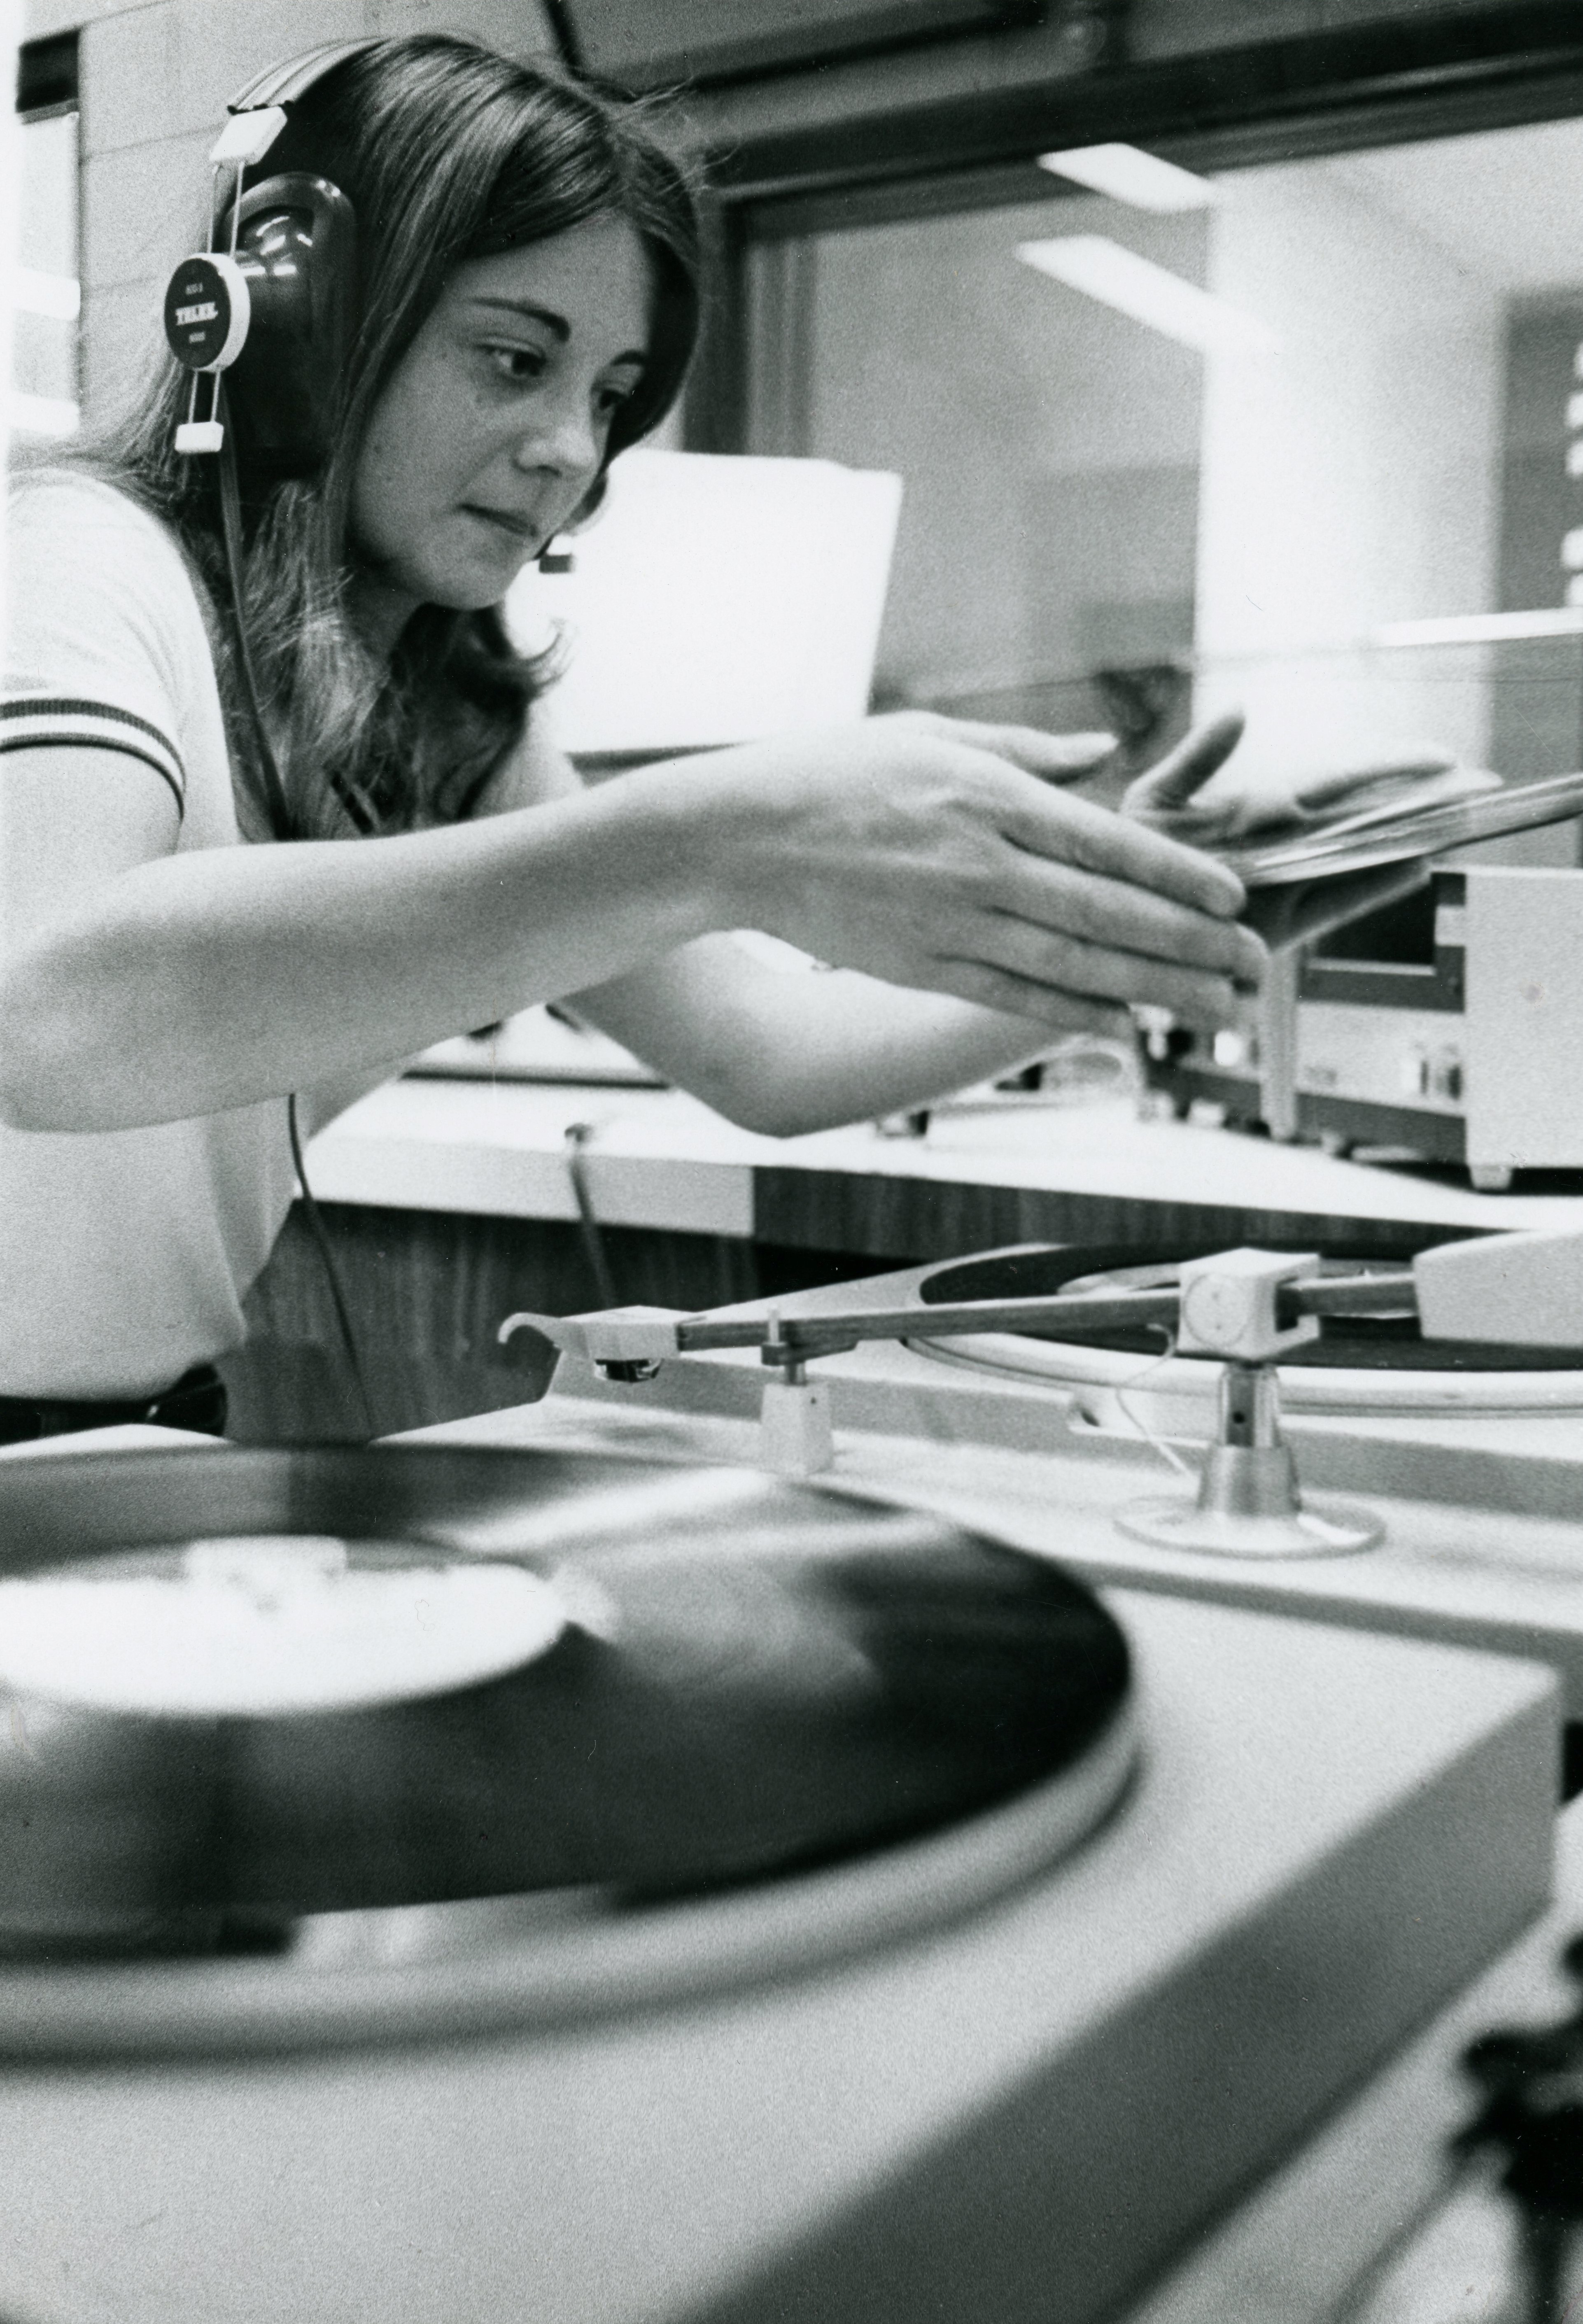 Student puts a record on the turntable at the campus radio station